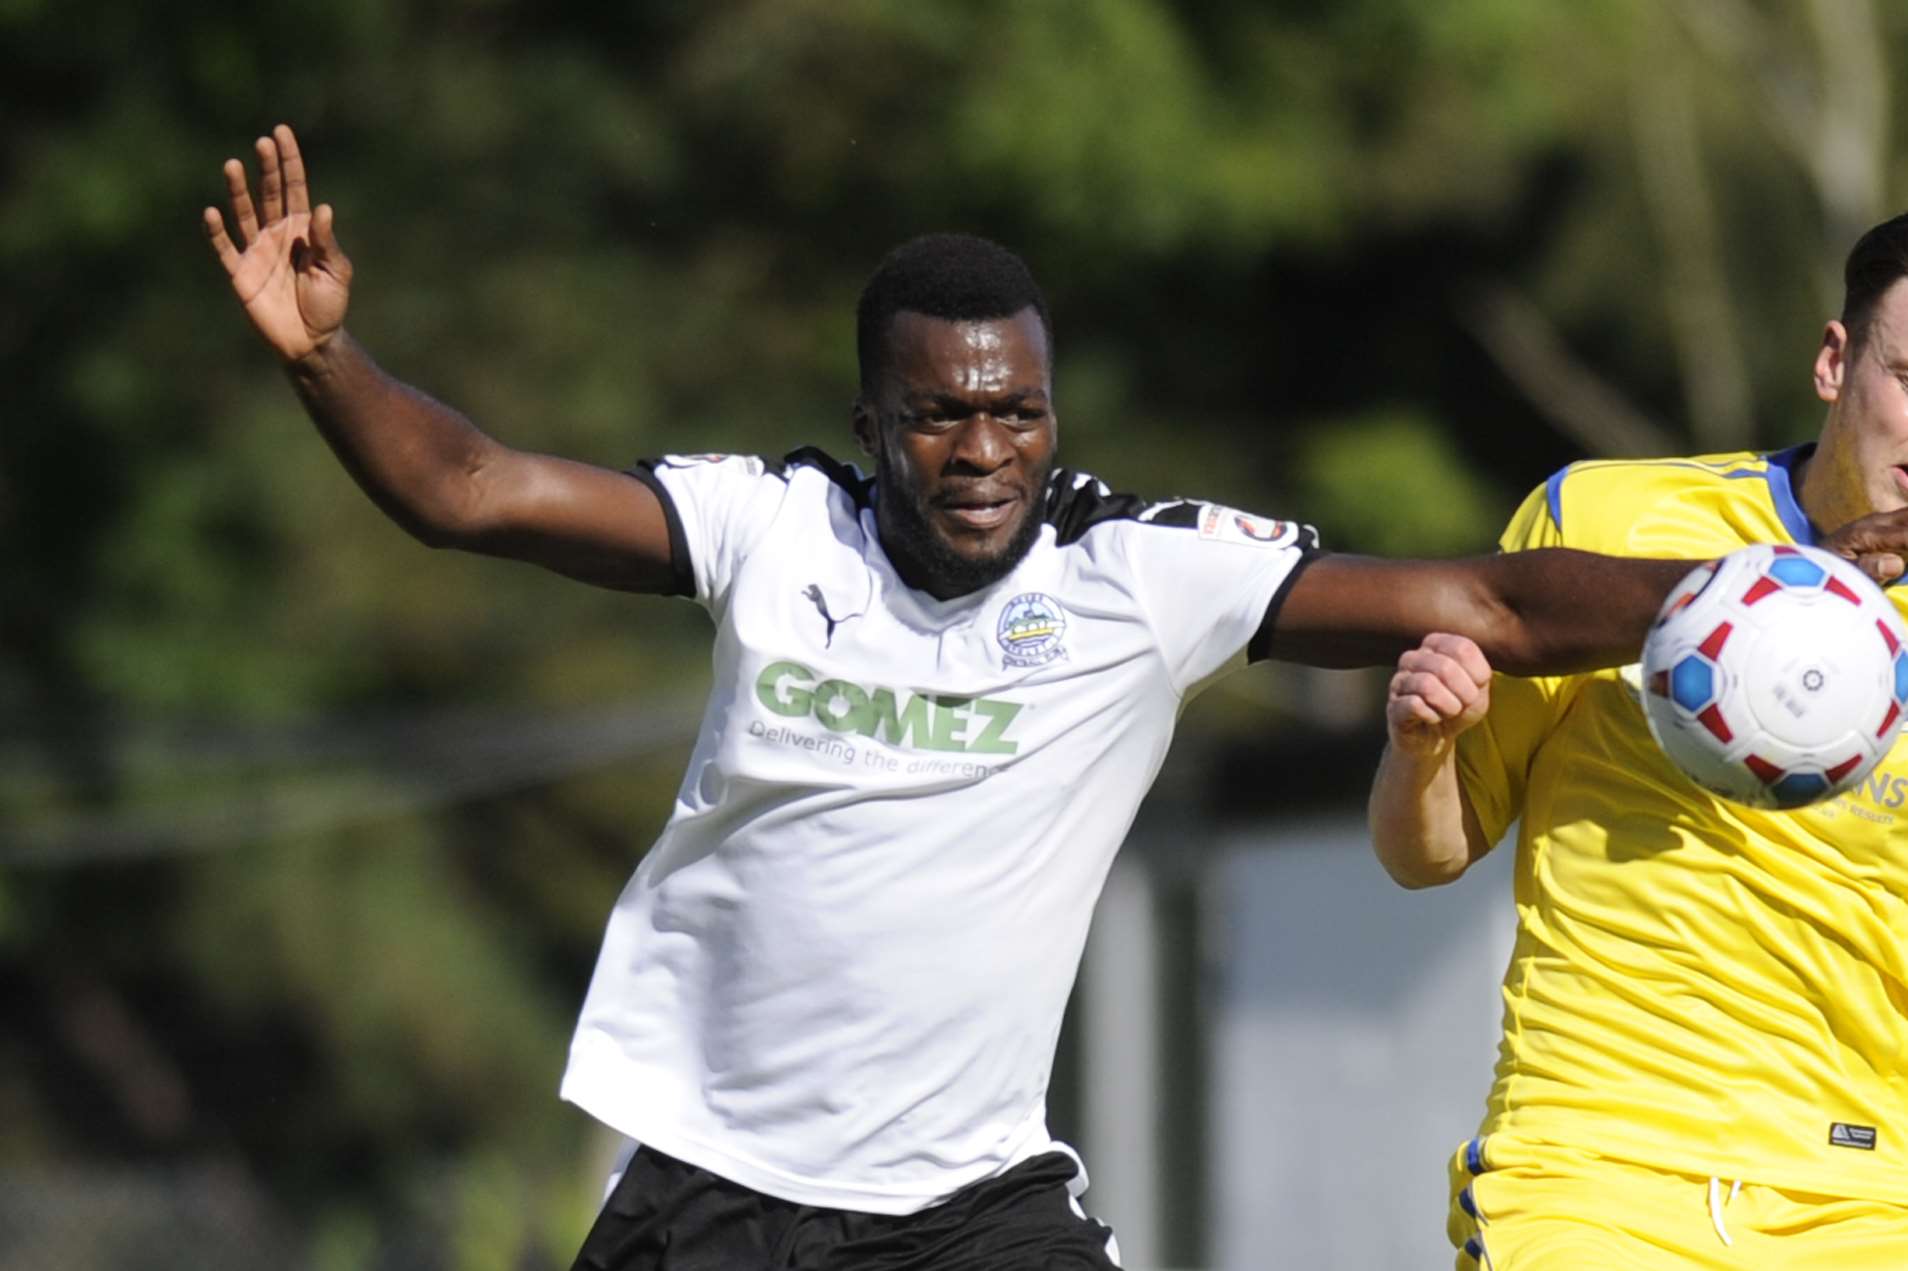 Duane Ofori-Acheampong has signed for Dartford Picture: Tony Flashman